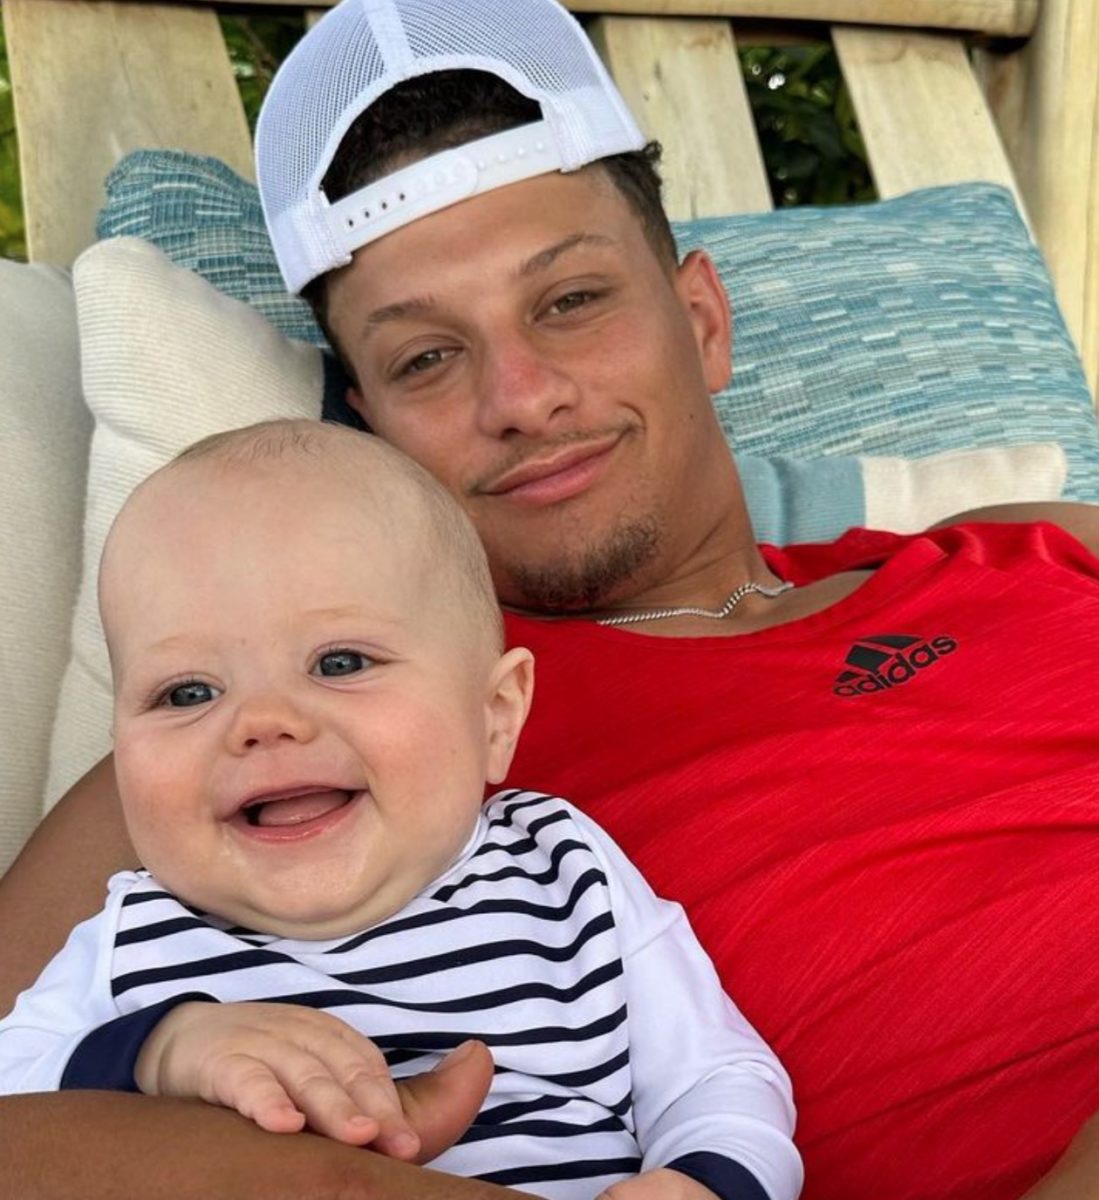 Brittany Mahomes Details the ‘Scary’ and ‘Frantic’ Moment She Learned Her 8-Month-Old Son is Allergic to Peanuts | Brittany Mahomes recently detailed a 'very scary and frantic' trip to the ER after learning her 8-month-old son is 'highly highly allergic to peanuts.'